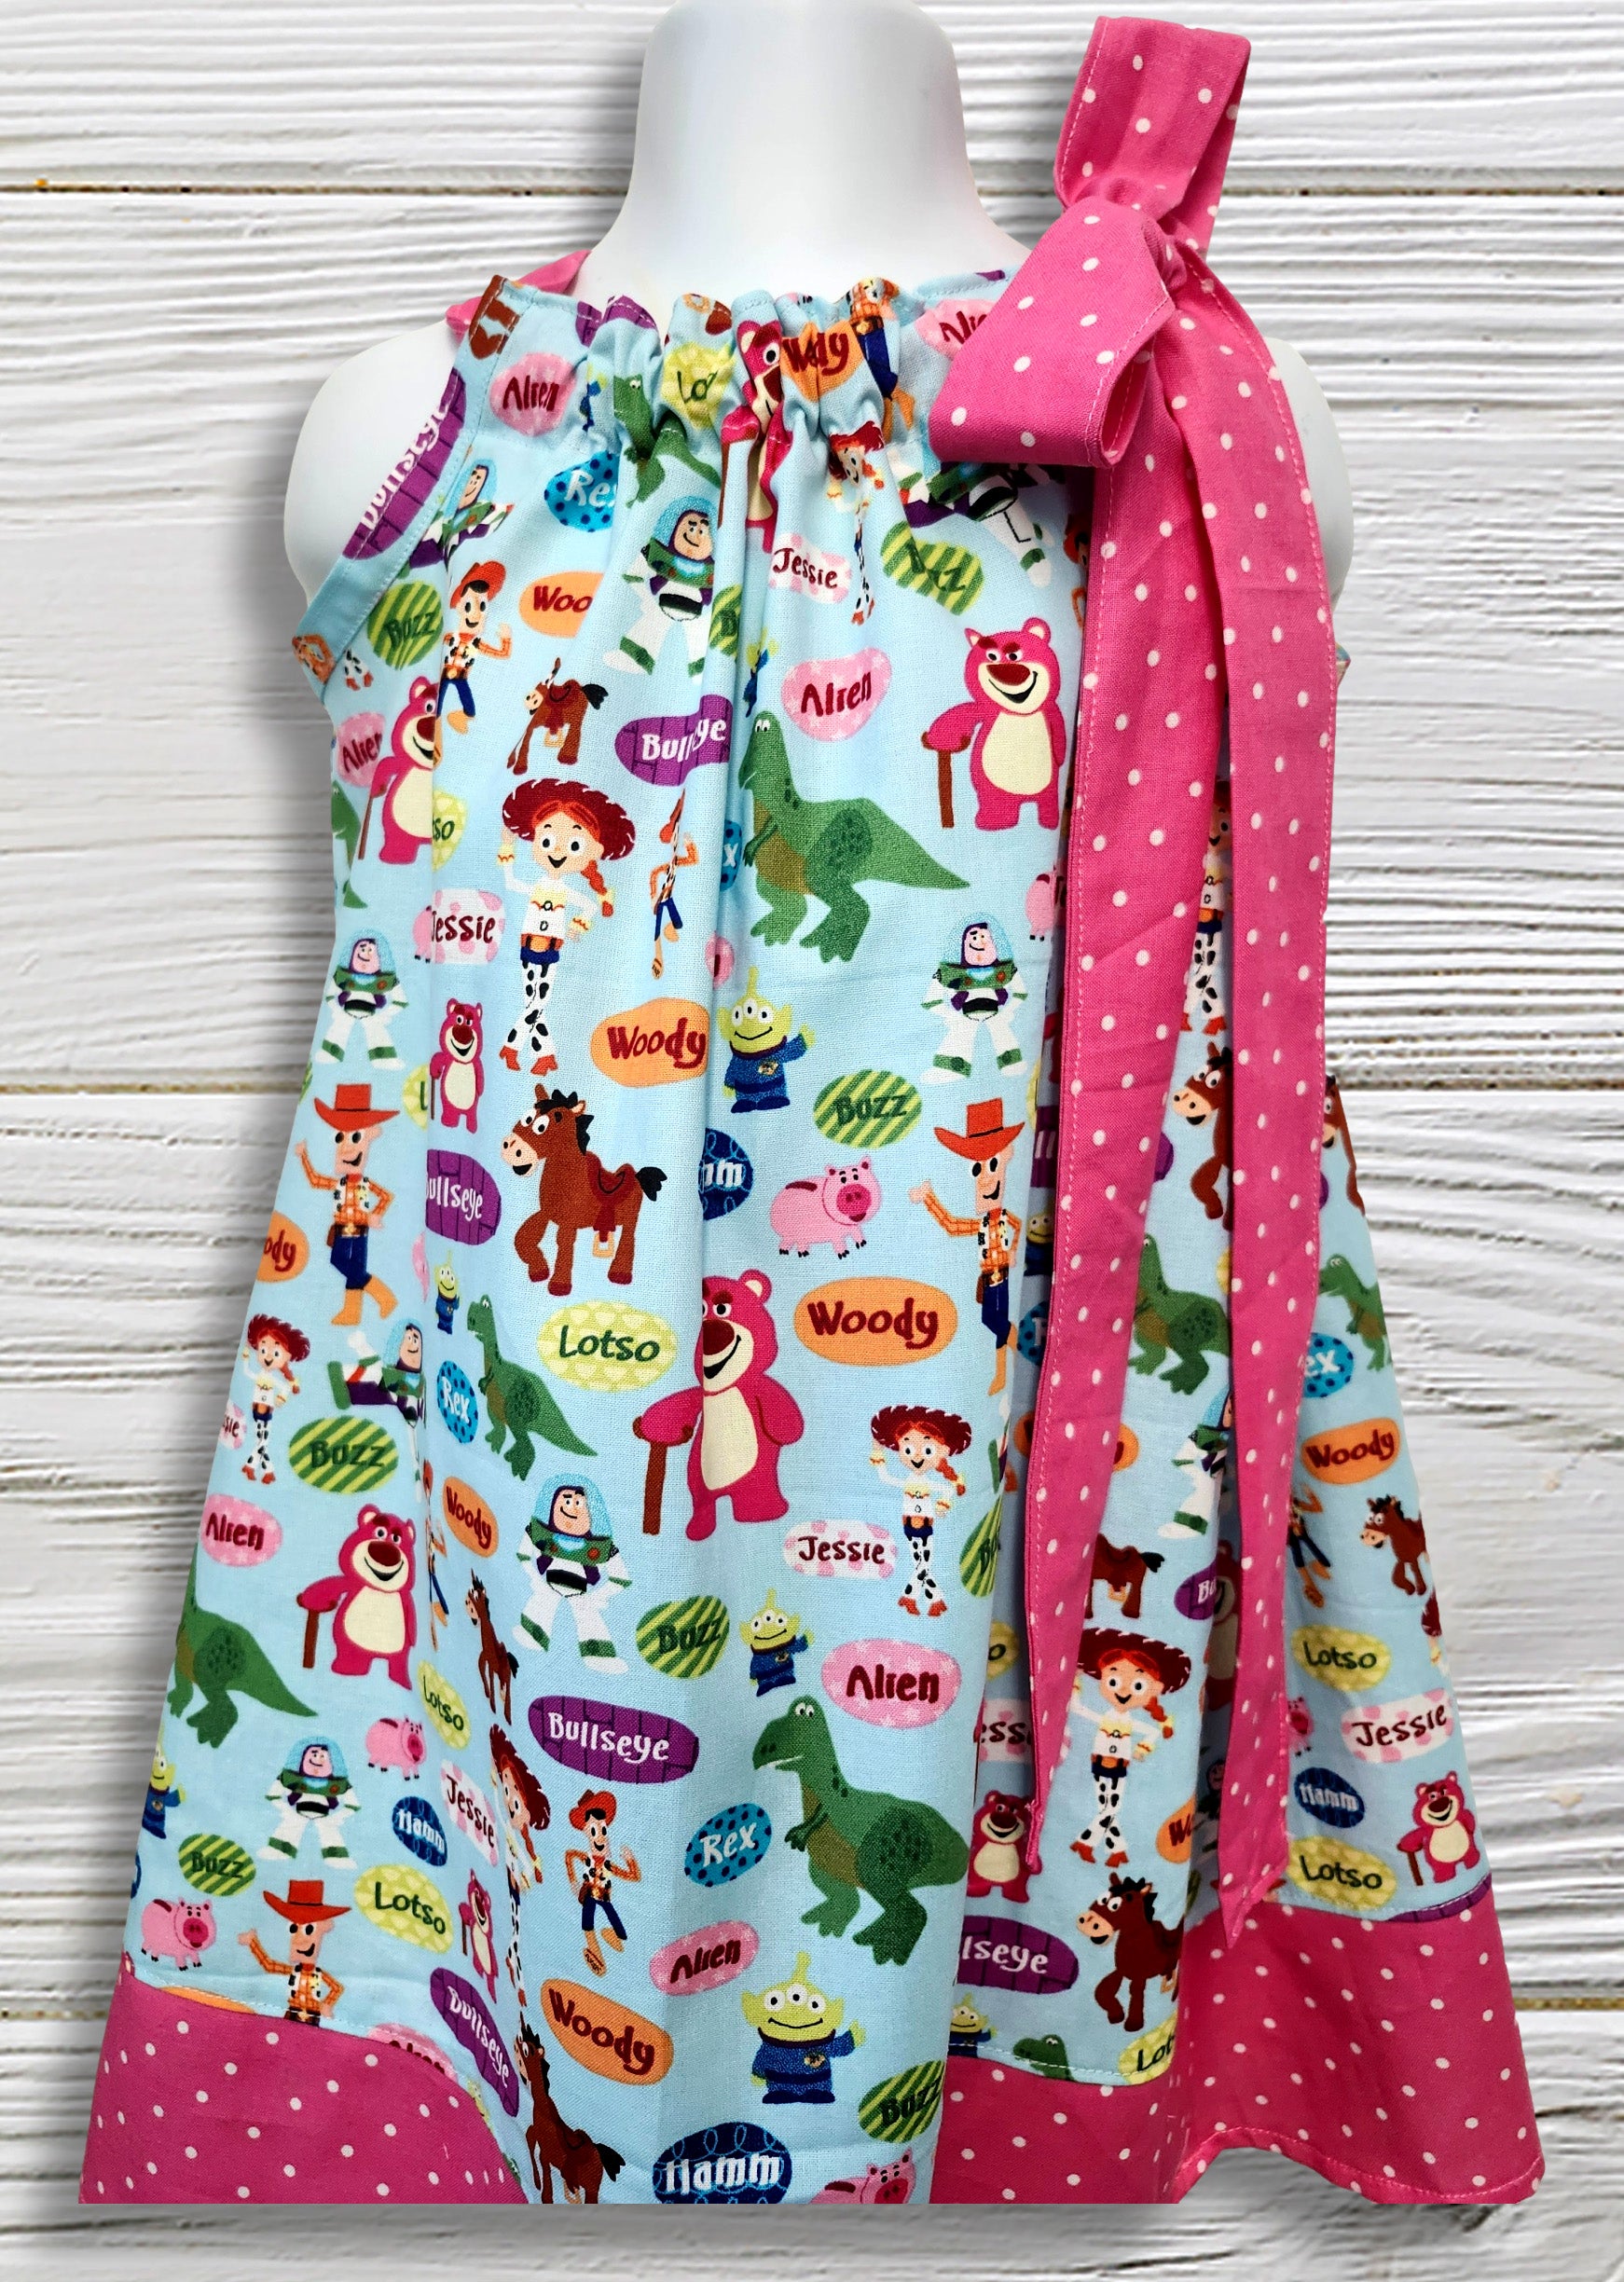 Pillowcase dress in a Toy Story print fabric